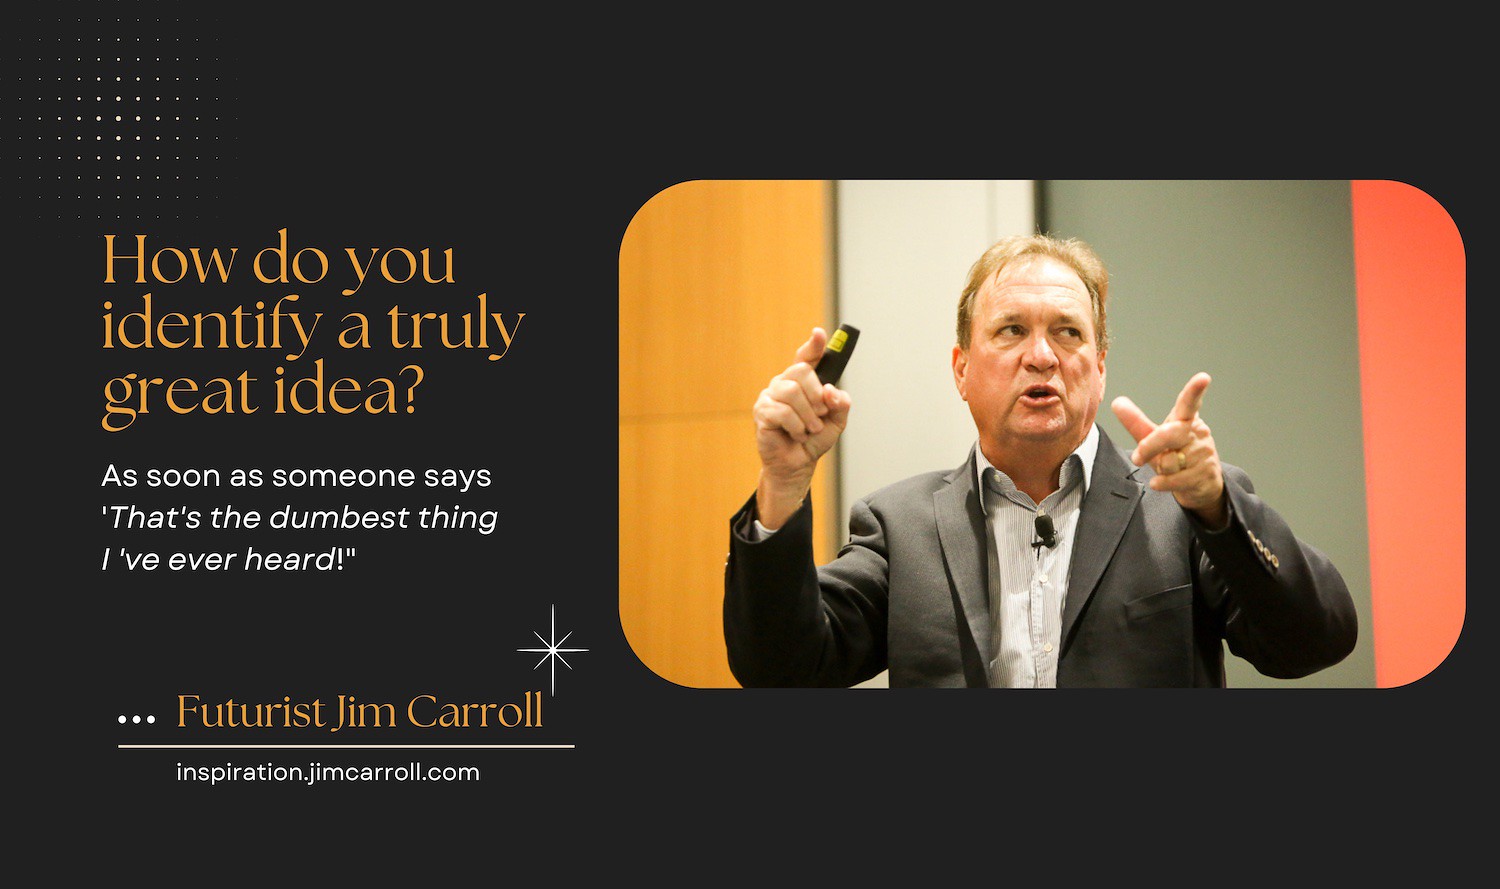 "How do you identify a truly great idea? As soon as someone says 'That's the dumbest thing I've ever heard!'" - Futurist Jim Carroll